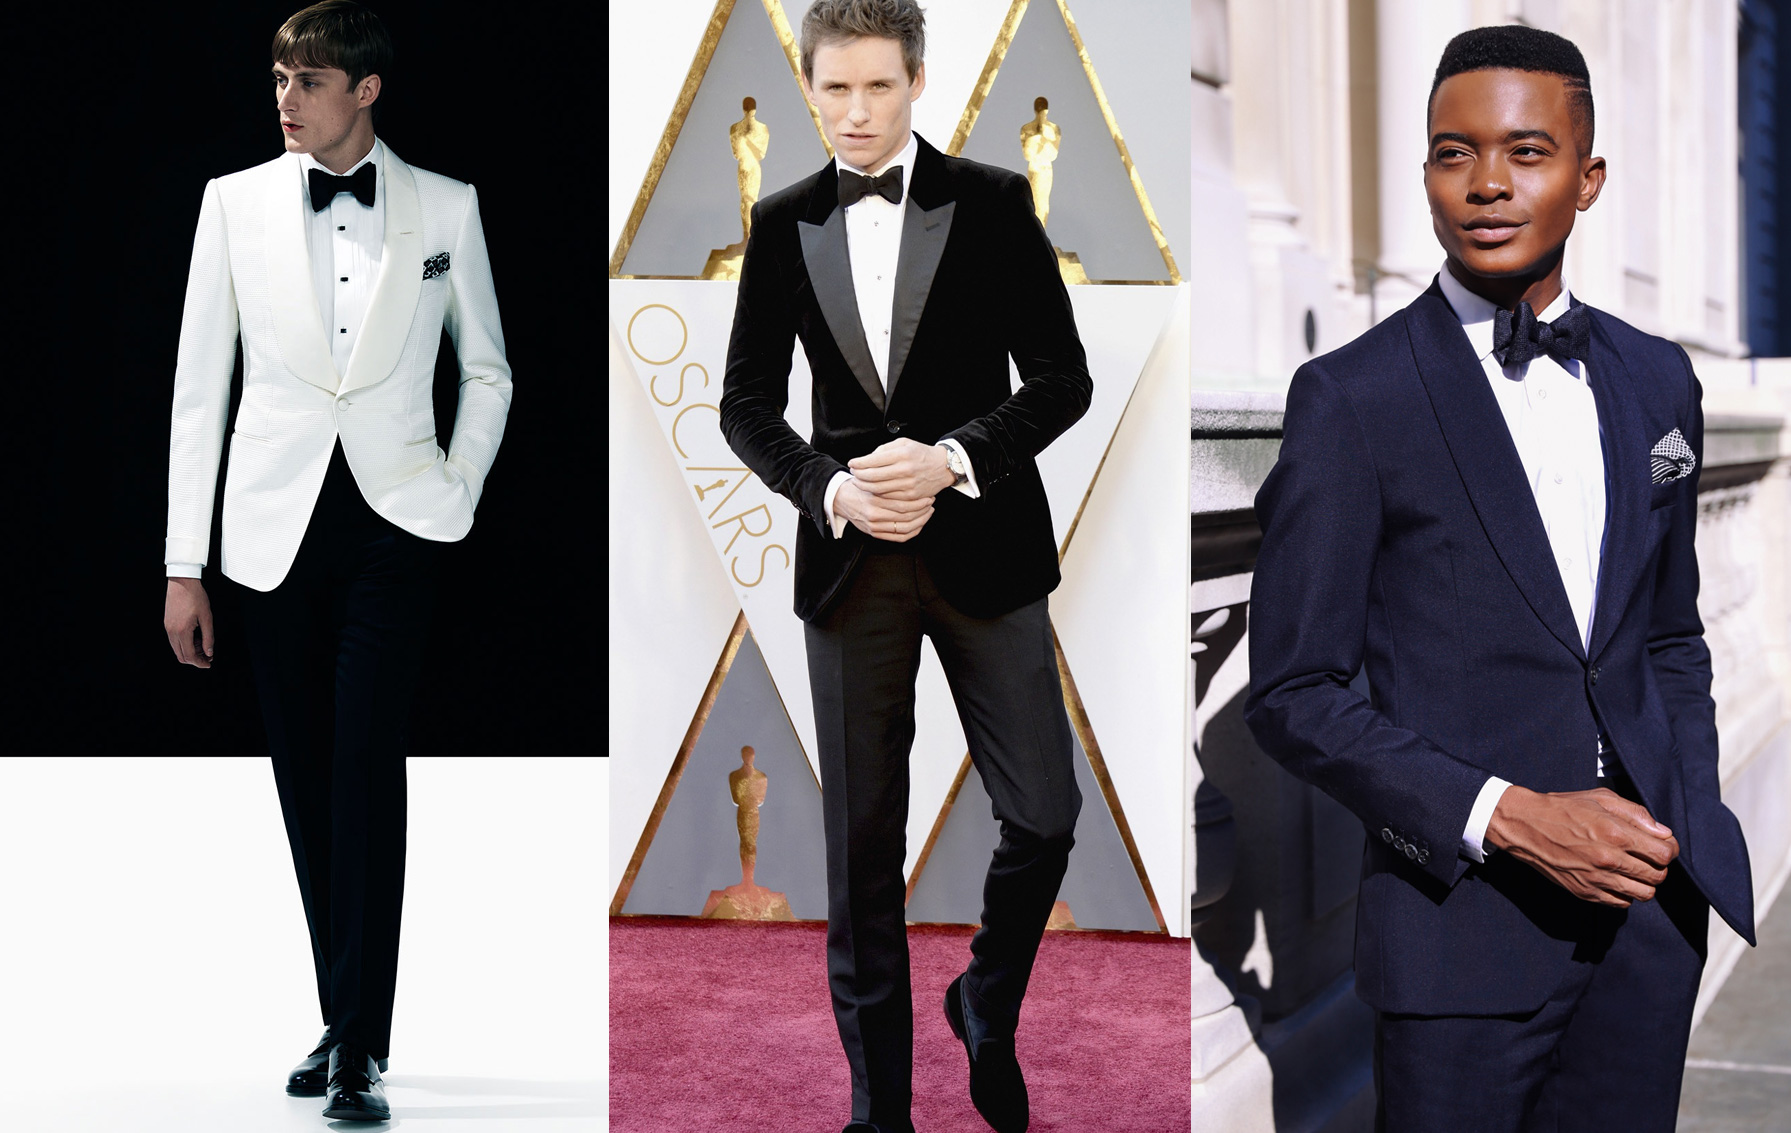 What To Wear To A Wedding - The Modern Men's Guide